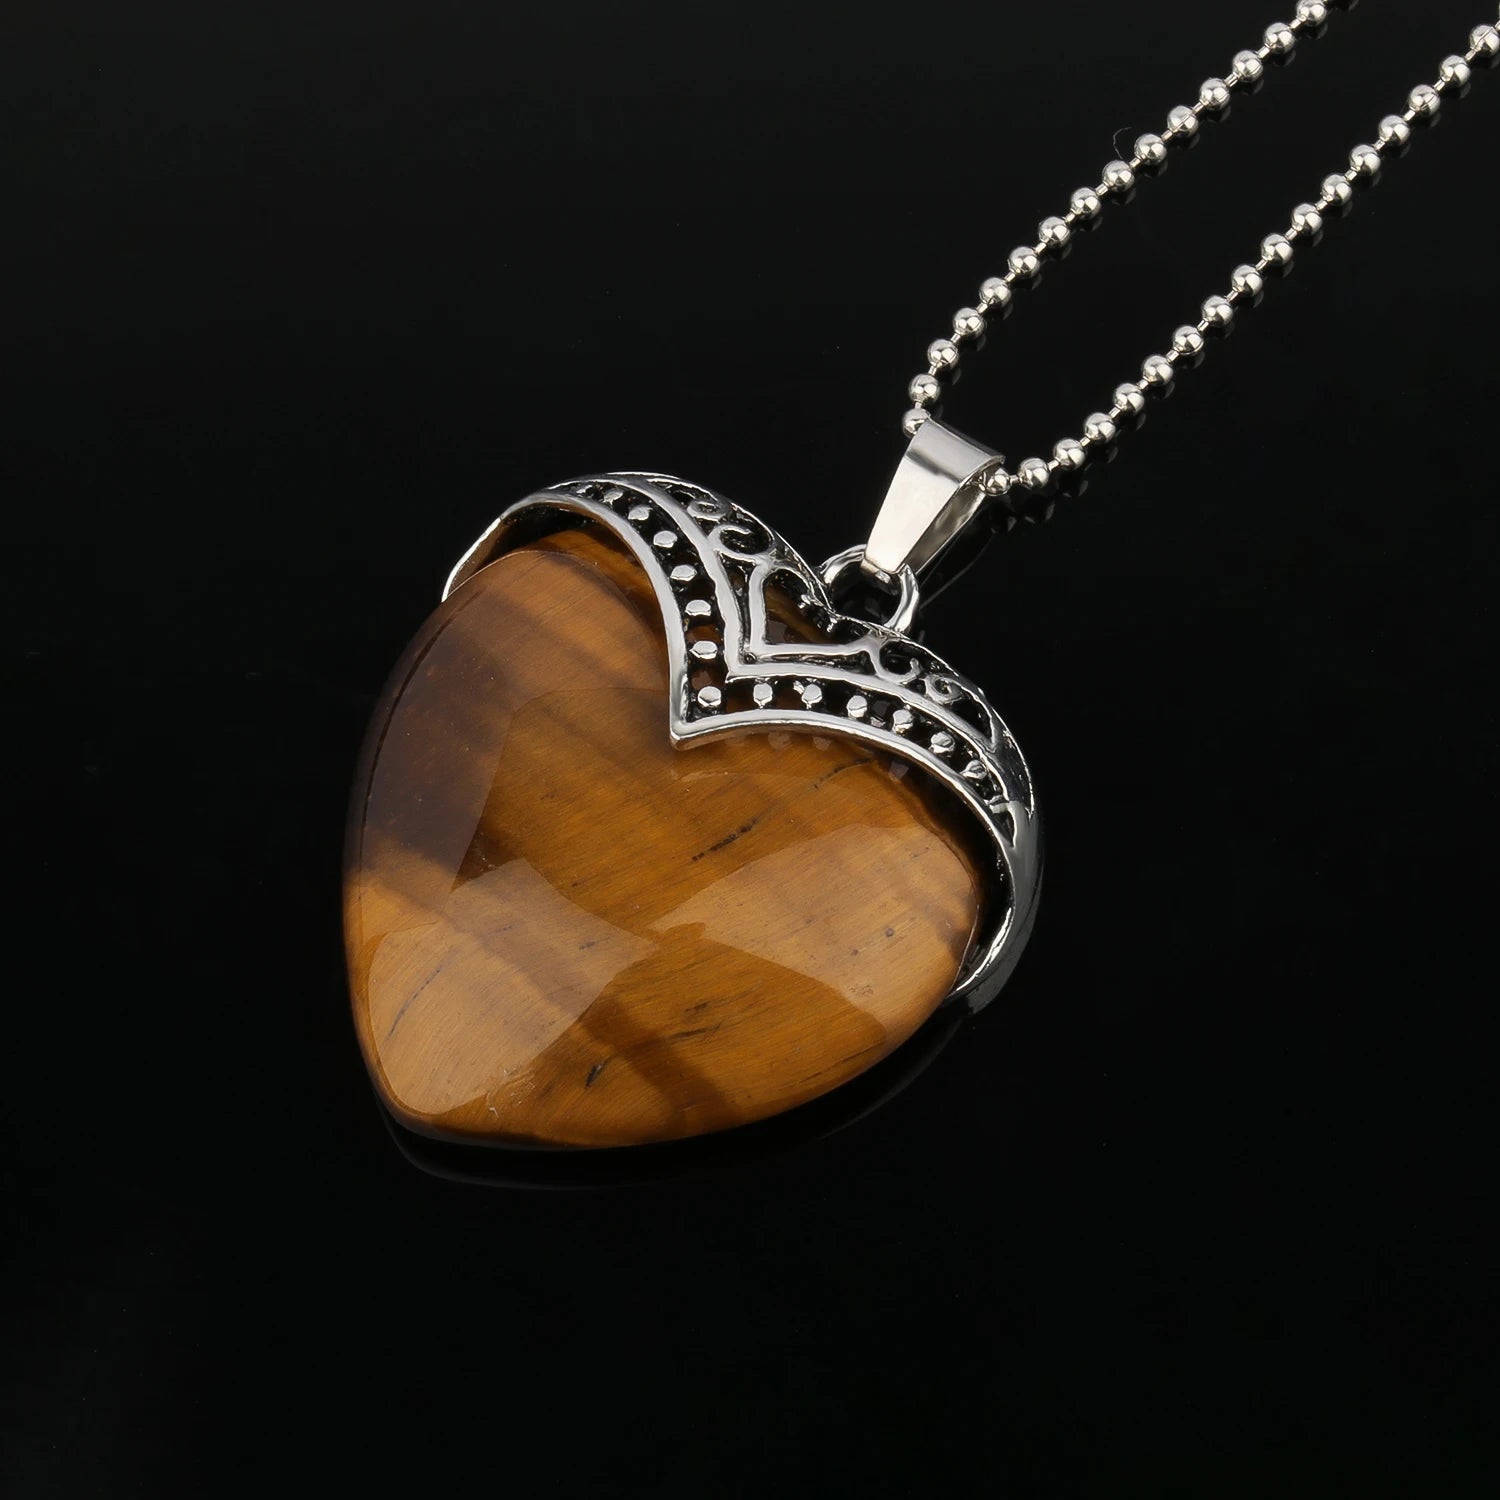 10 Types Yellow Tiger Eye Natural Stone Pendant With Chain Display Box Heart Waterdrop Shape Pendant fit for Women Jewelry DIY